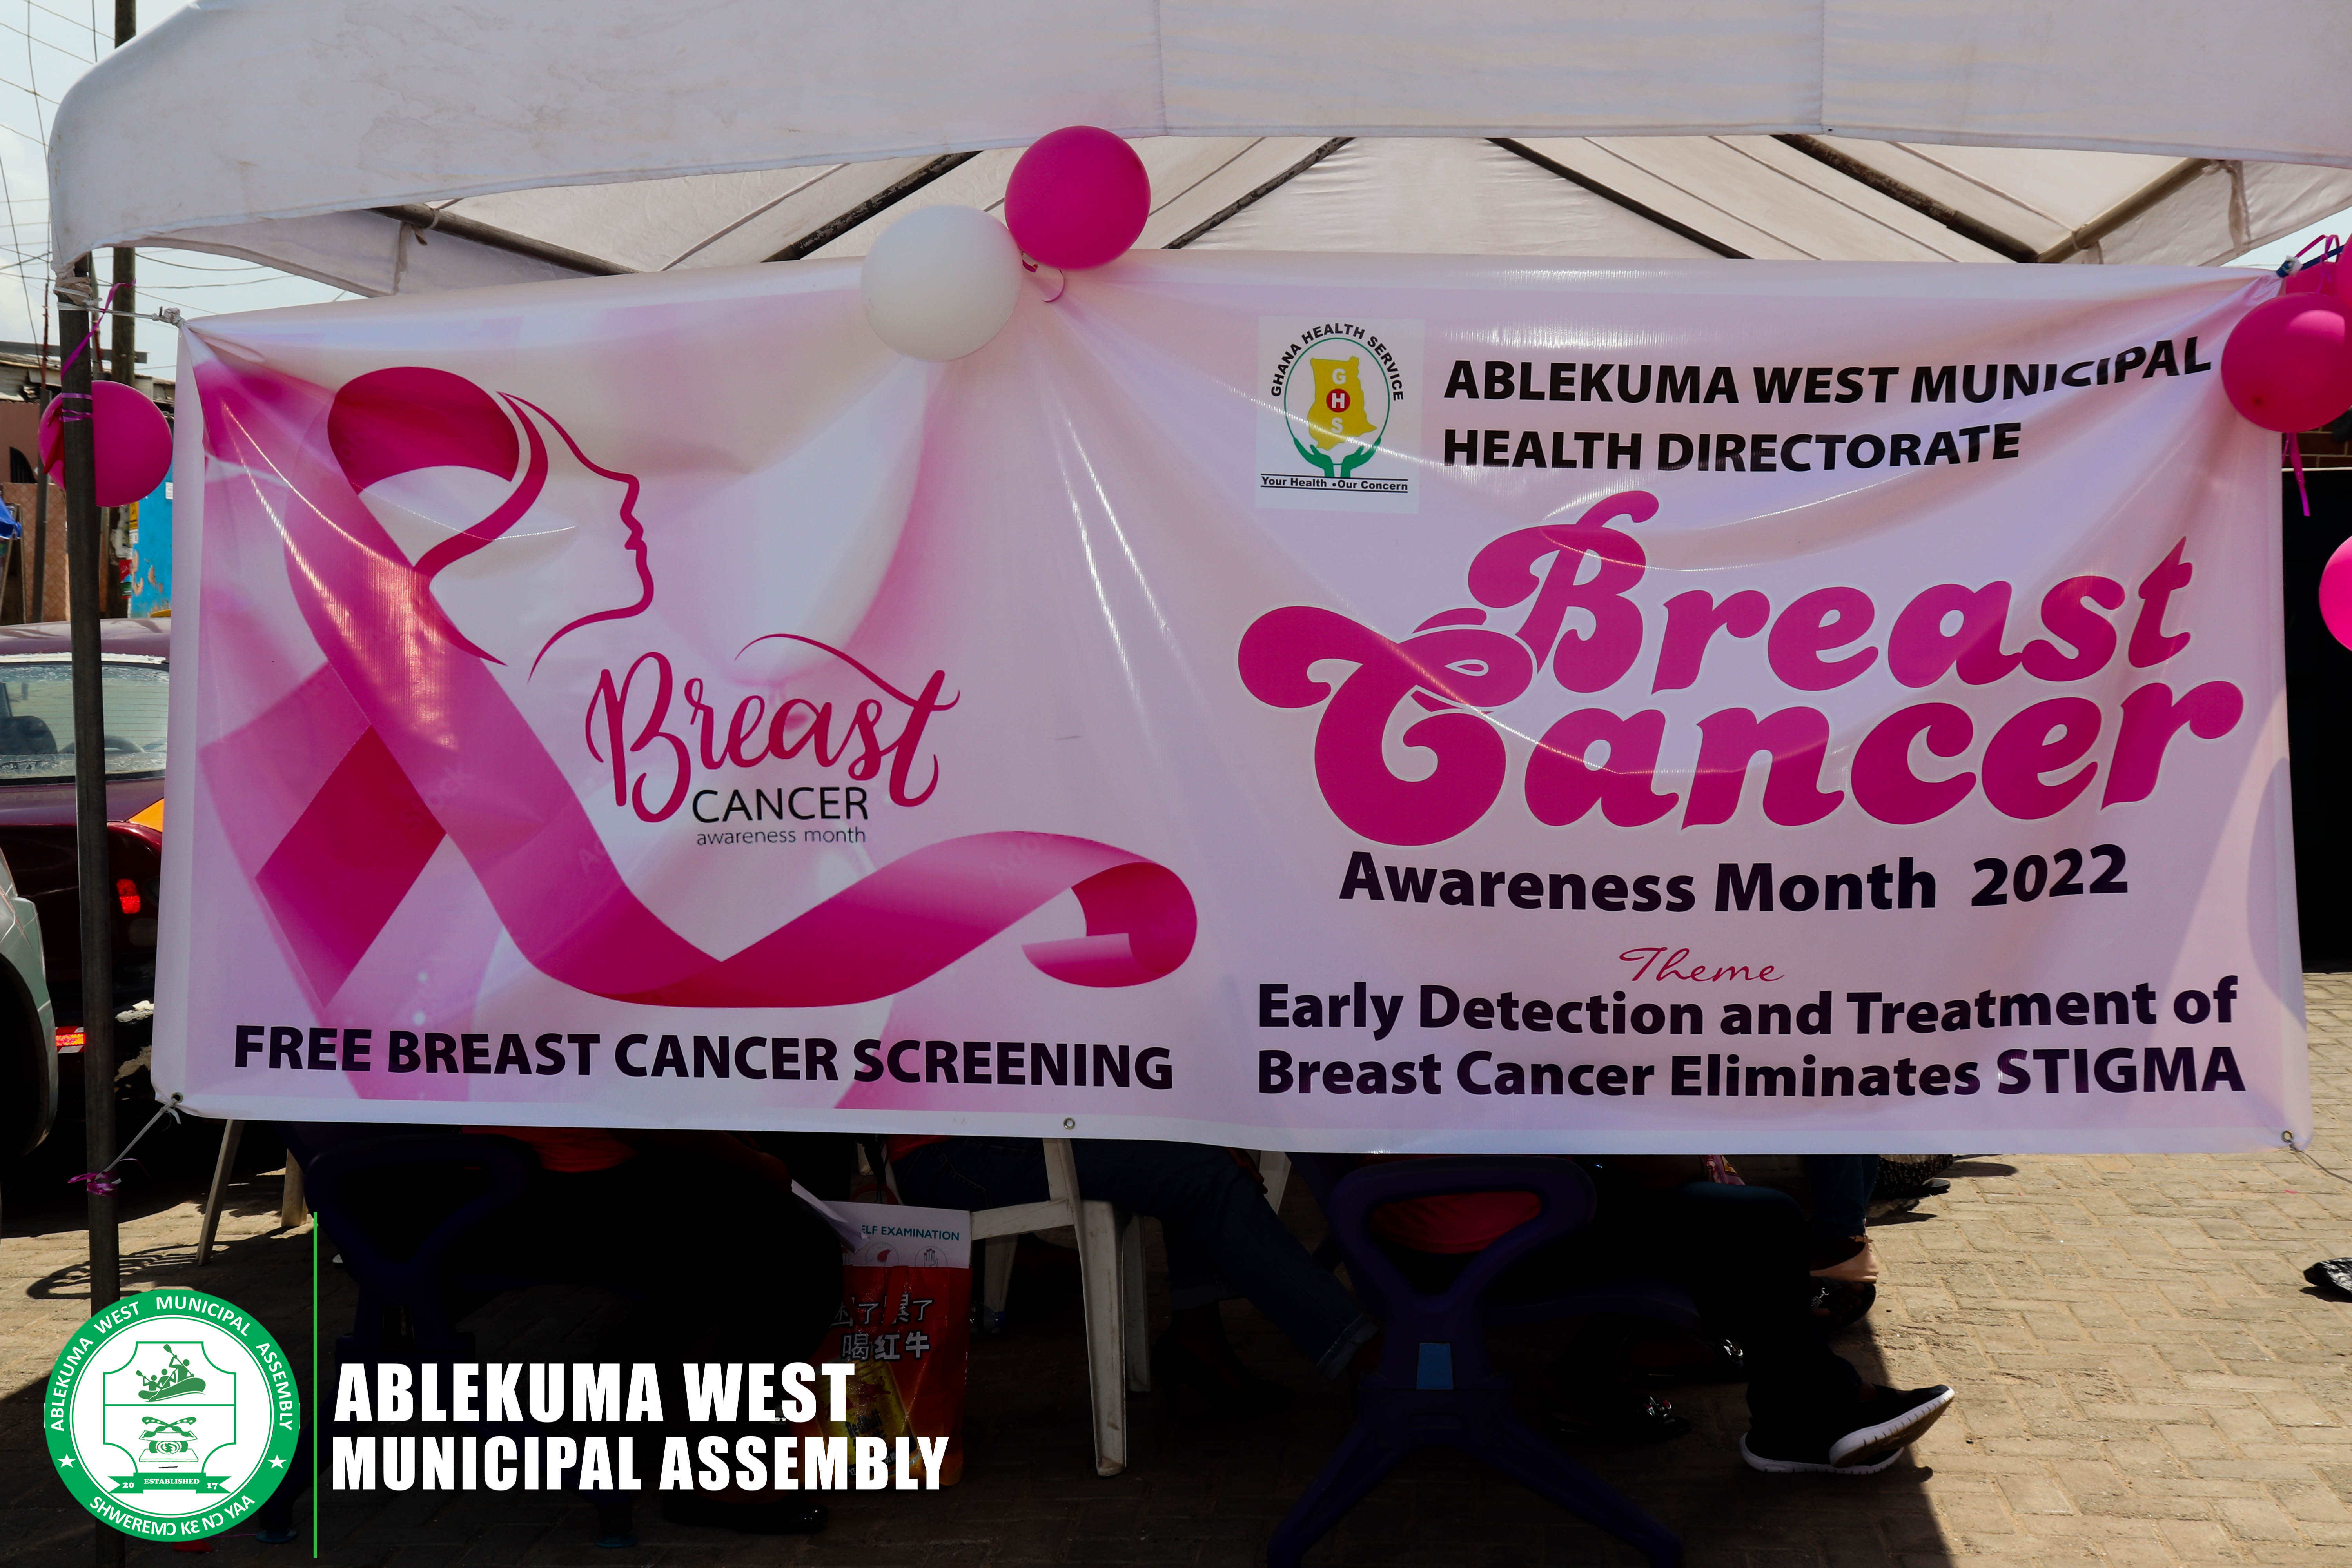 BREAST CANCER AWARENESS MONTH LAUNCHED 